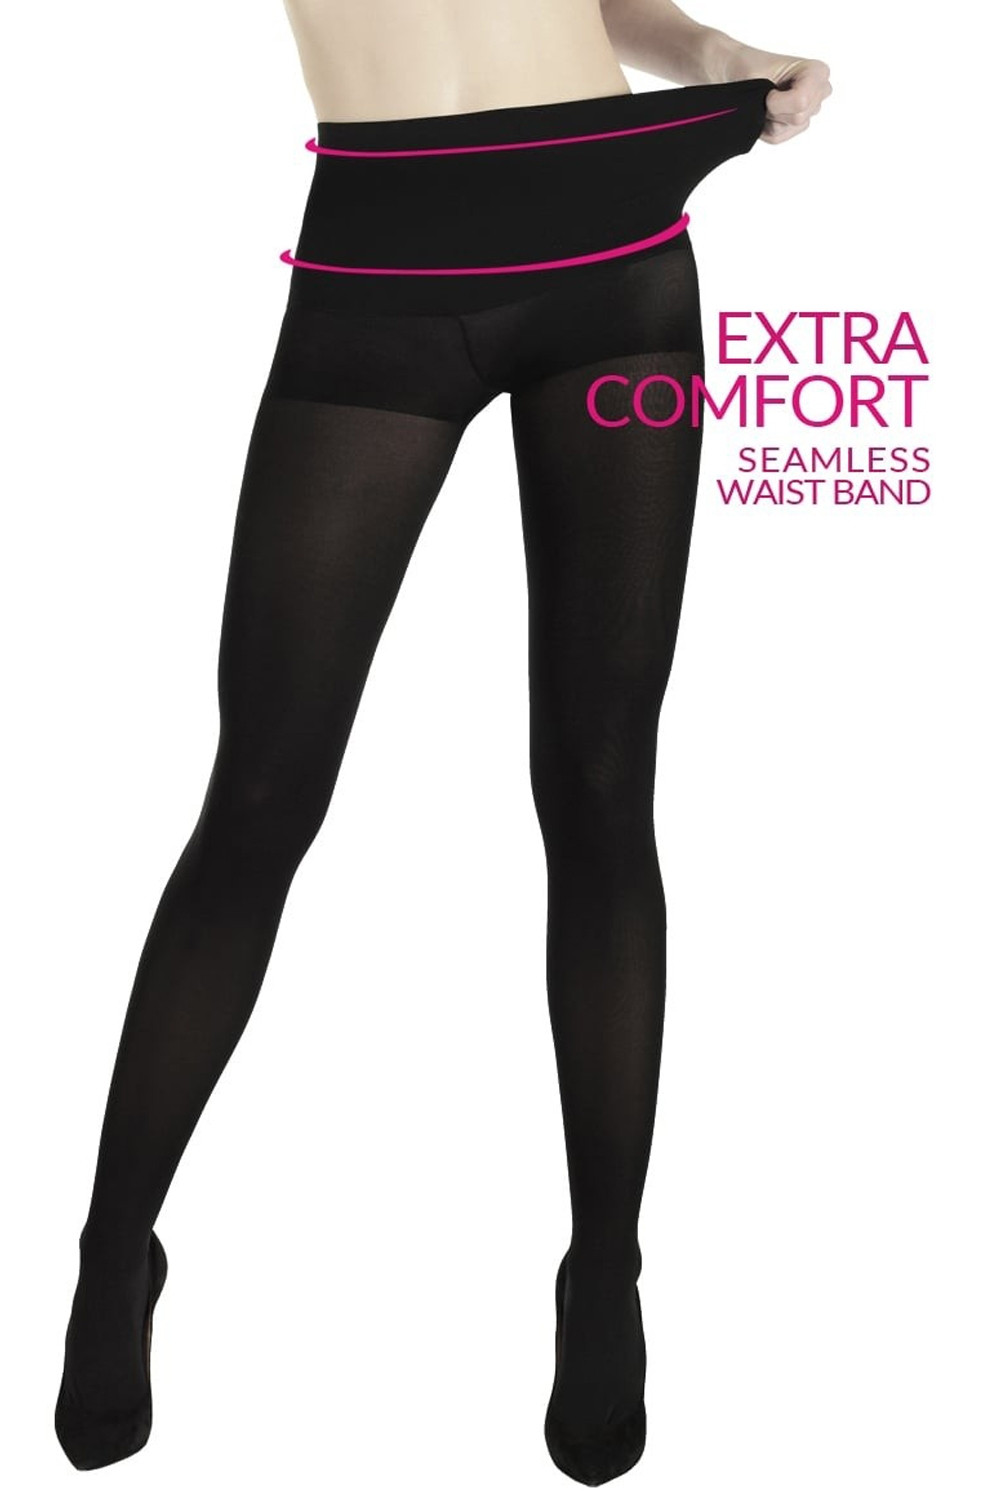 Extra Comfort Waist Band TIGHTS Tights, Tights & Hosiery, Women